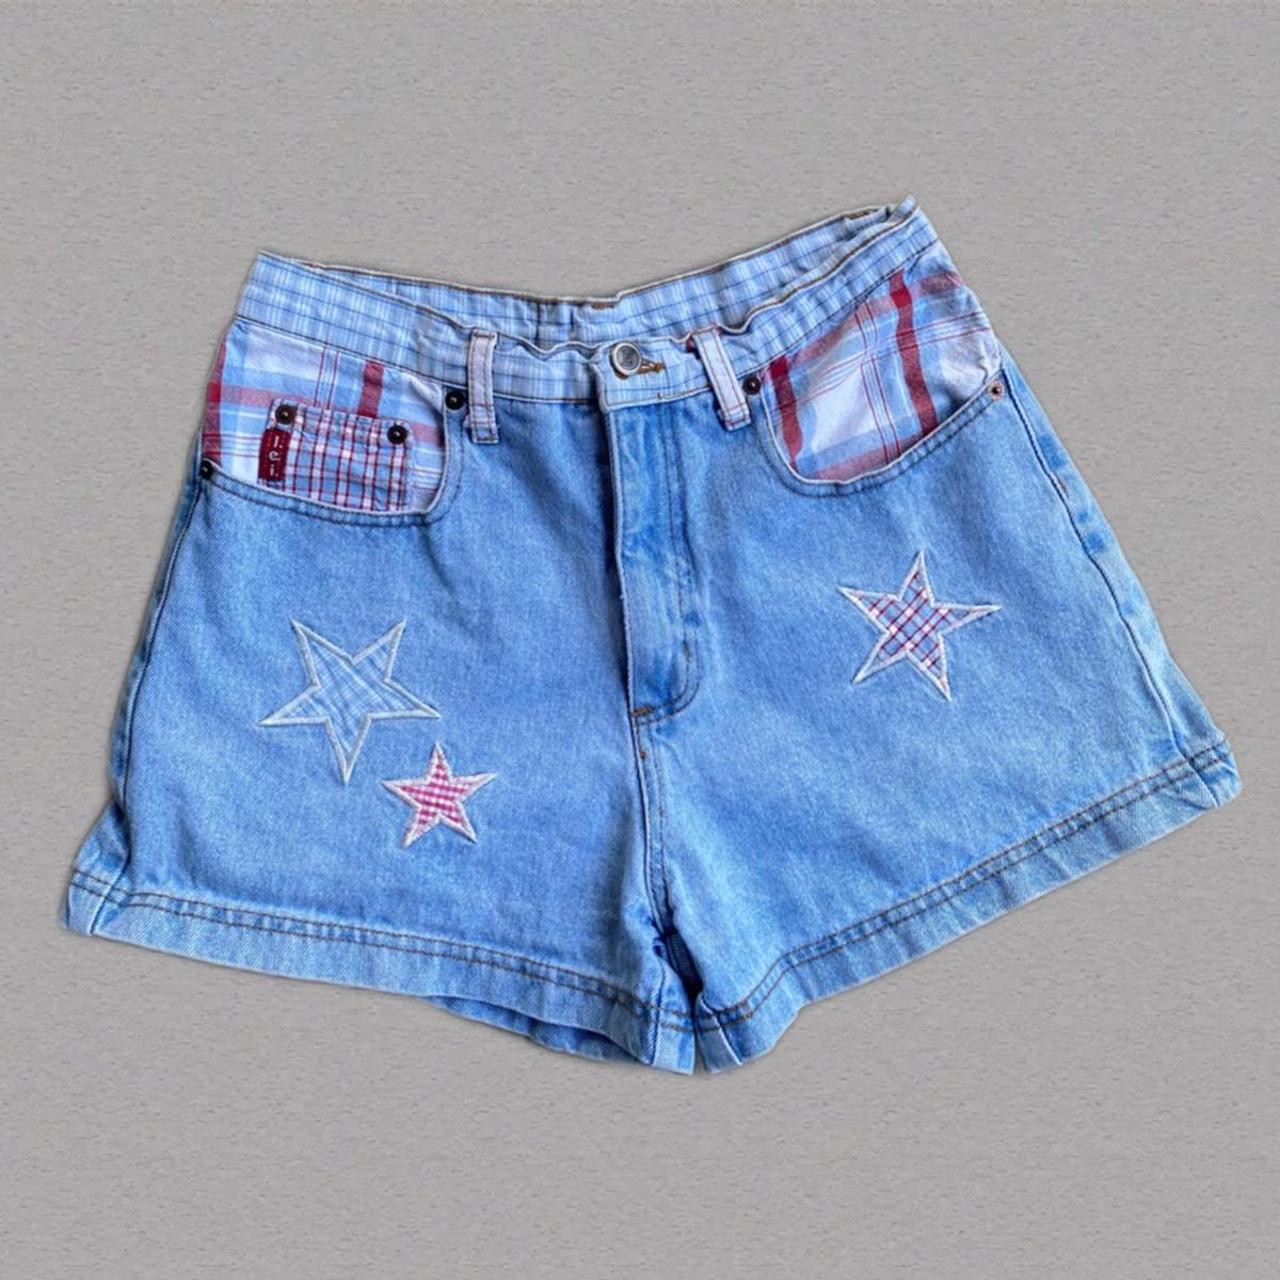 L.e.i. Women's Red and Blue Shorts